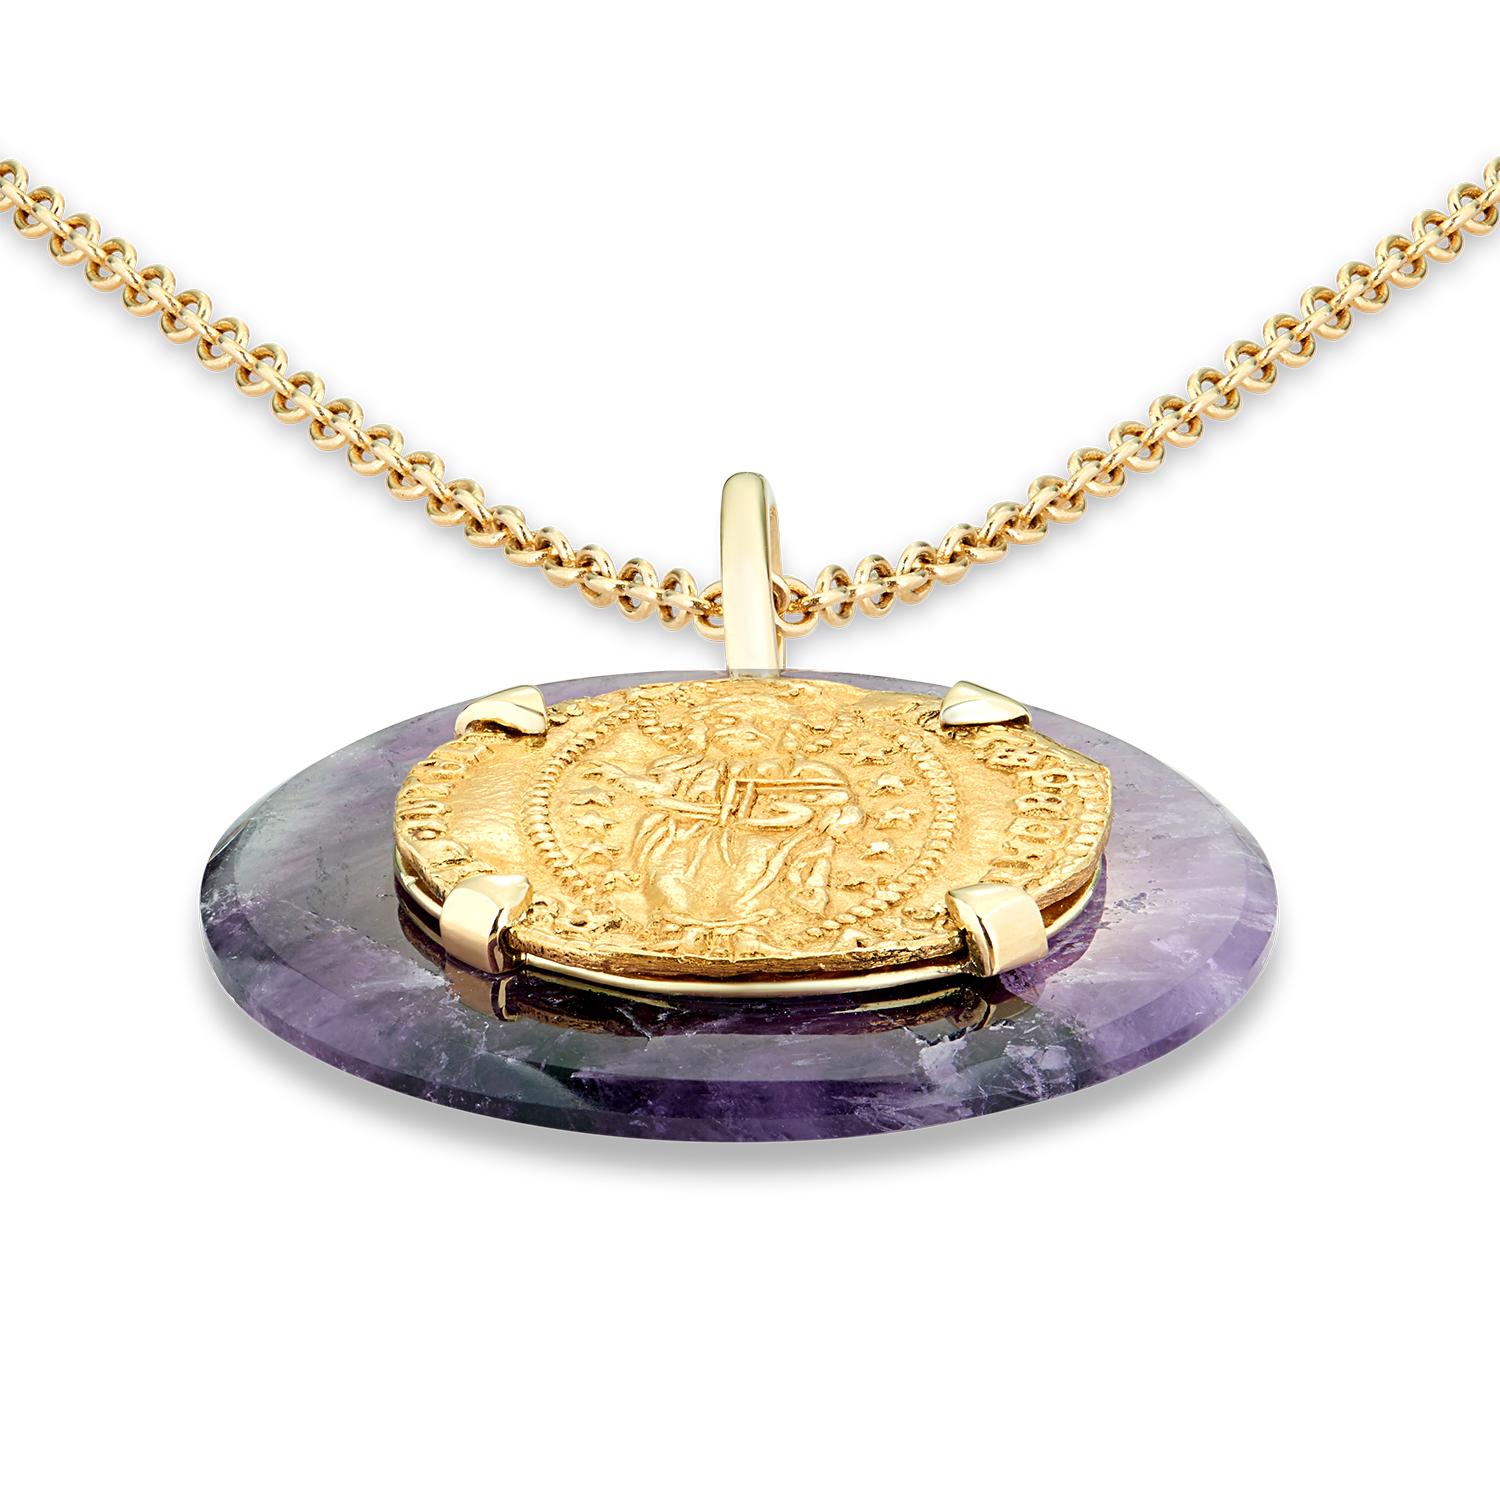 This DUBINI coin necklace from the 'Empires' collection features an authentic Venetian gold ducat coin (LXII Doge 1382-1400) set in 18K yellow gold with amethyst quartz disc.

Disc diameter  3cm
Chain Length  75cm - also available in shorter 47cm on